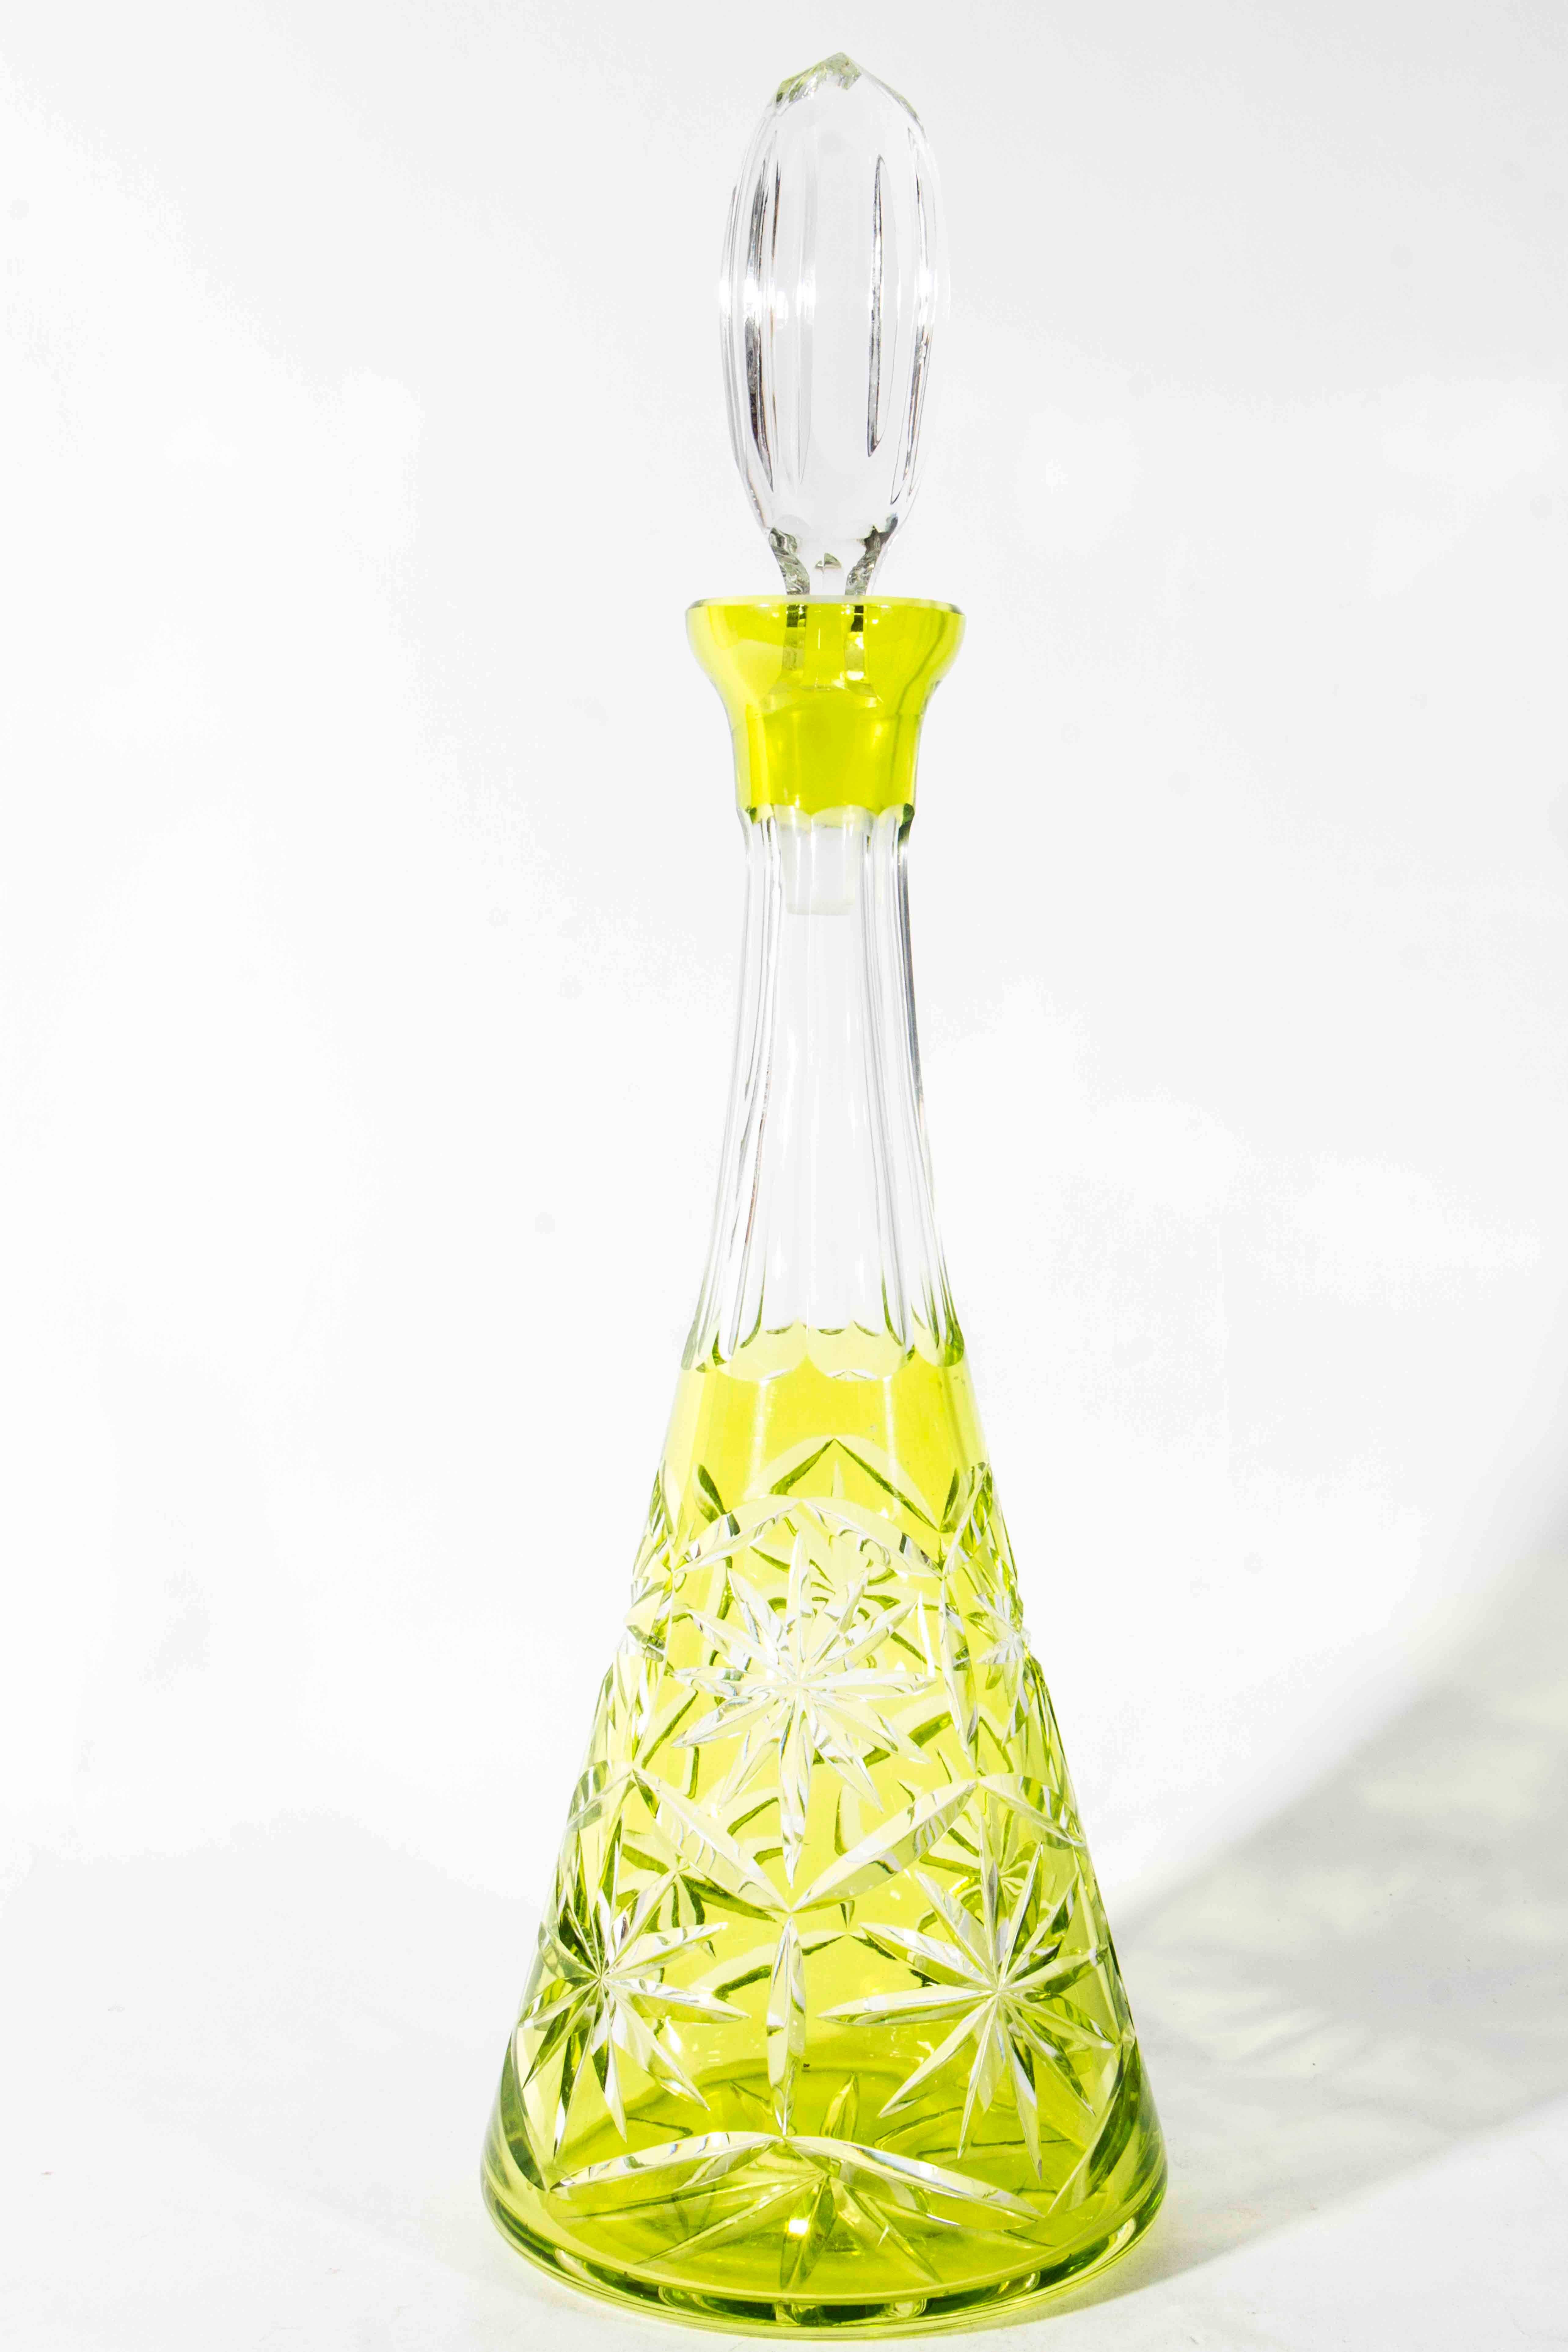 An antique Saint Louis lime decanter set. The set include lime decanter with clear cut crystal topper. Six lime wine glasses with clear stem. The decanter measure 16 inches high x 6 inches diameter. The glasses measure 7 inches high x 3 inches